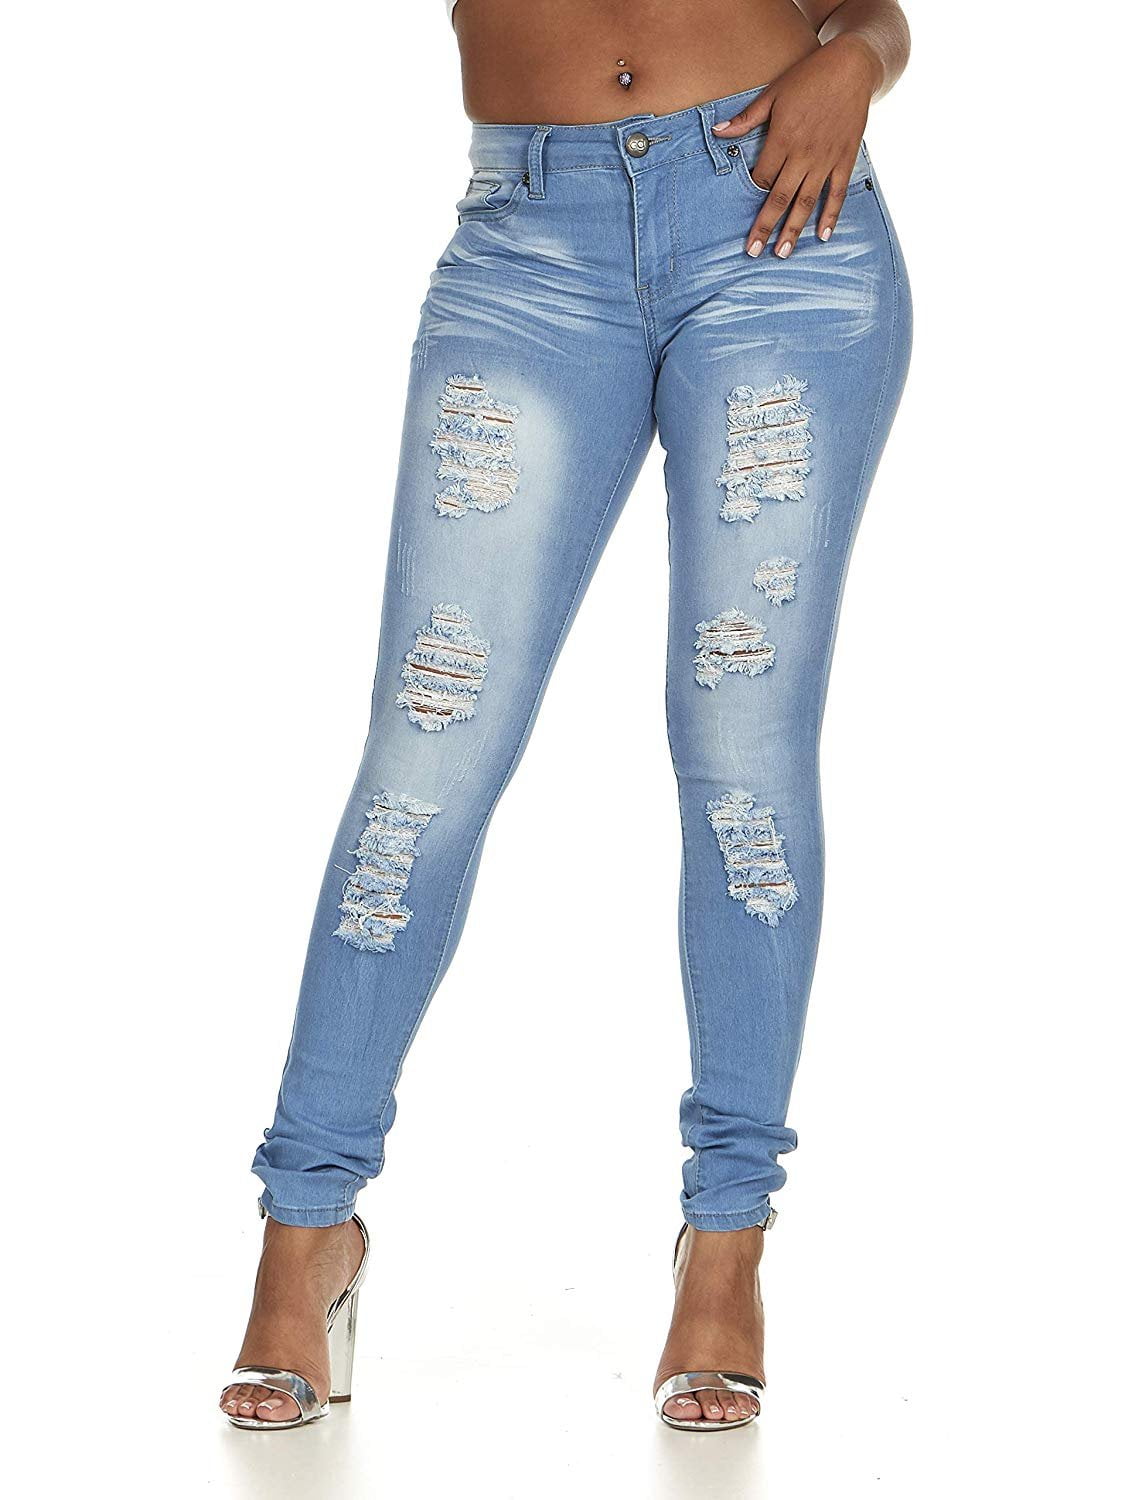 VIP Jeans - VIP Jeans for Women Juniors plus Ripped Distressed Skinny ...